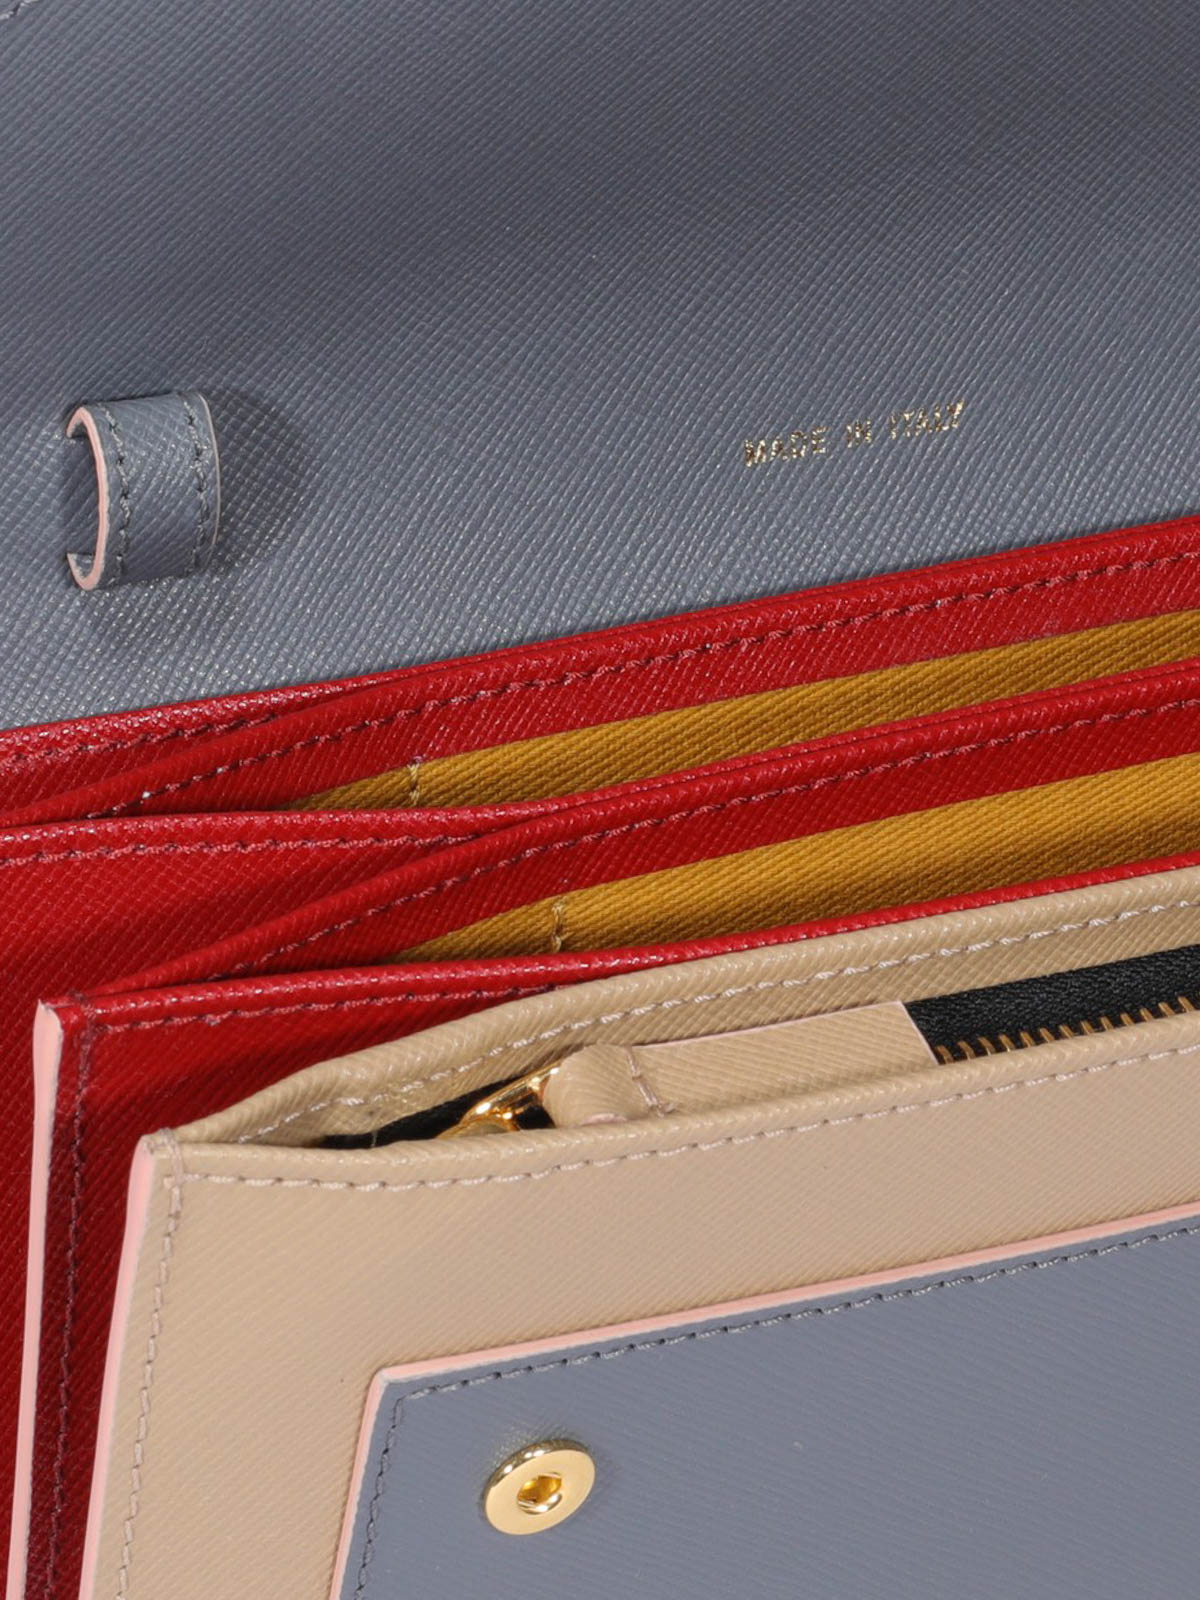 Saffiano and leather wallet with shoulder strap